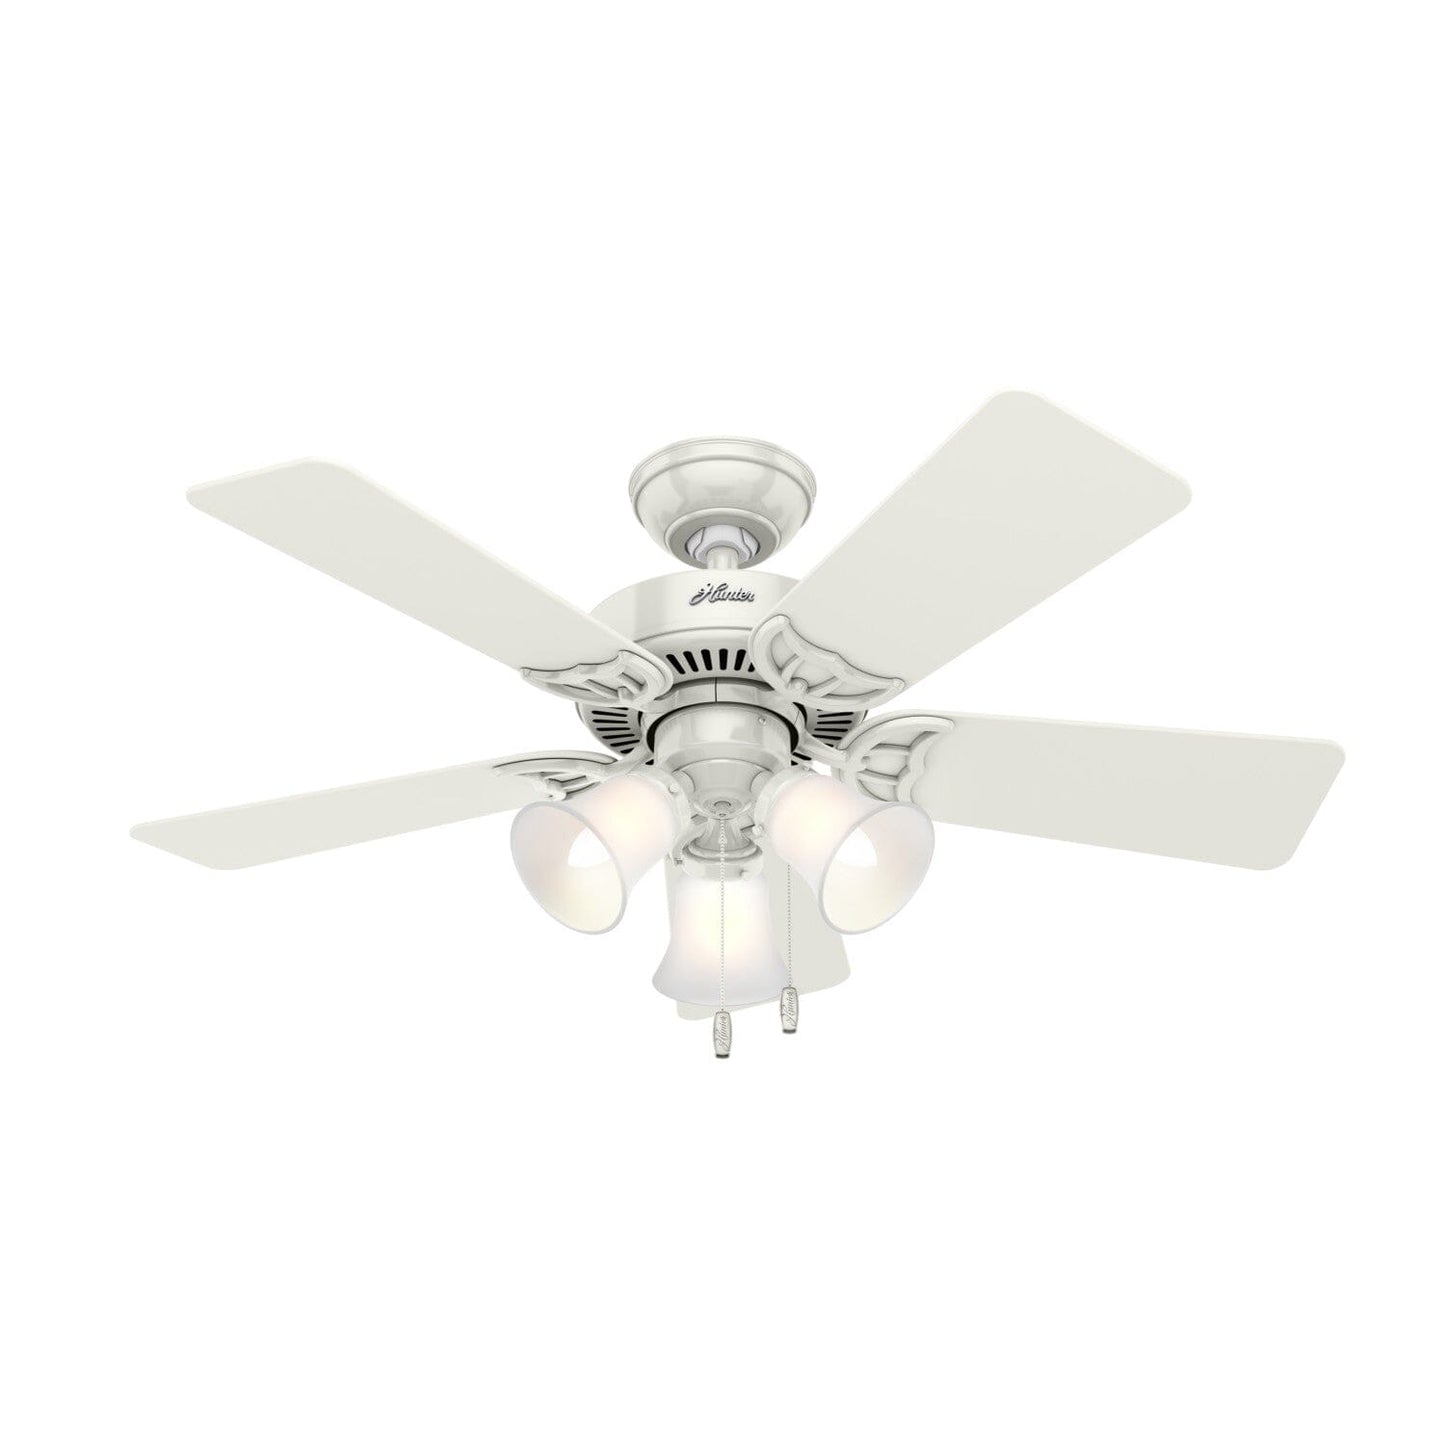 Southern Breeze with 3 Lights 42 inch Ceiling Fans Hunter White - White 